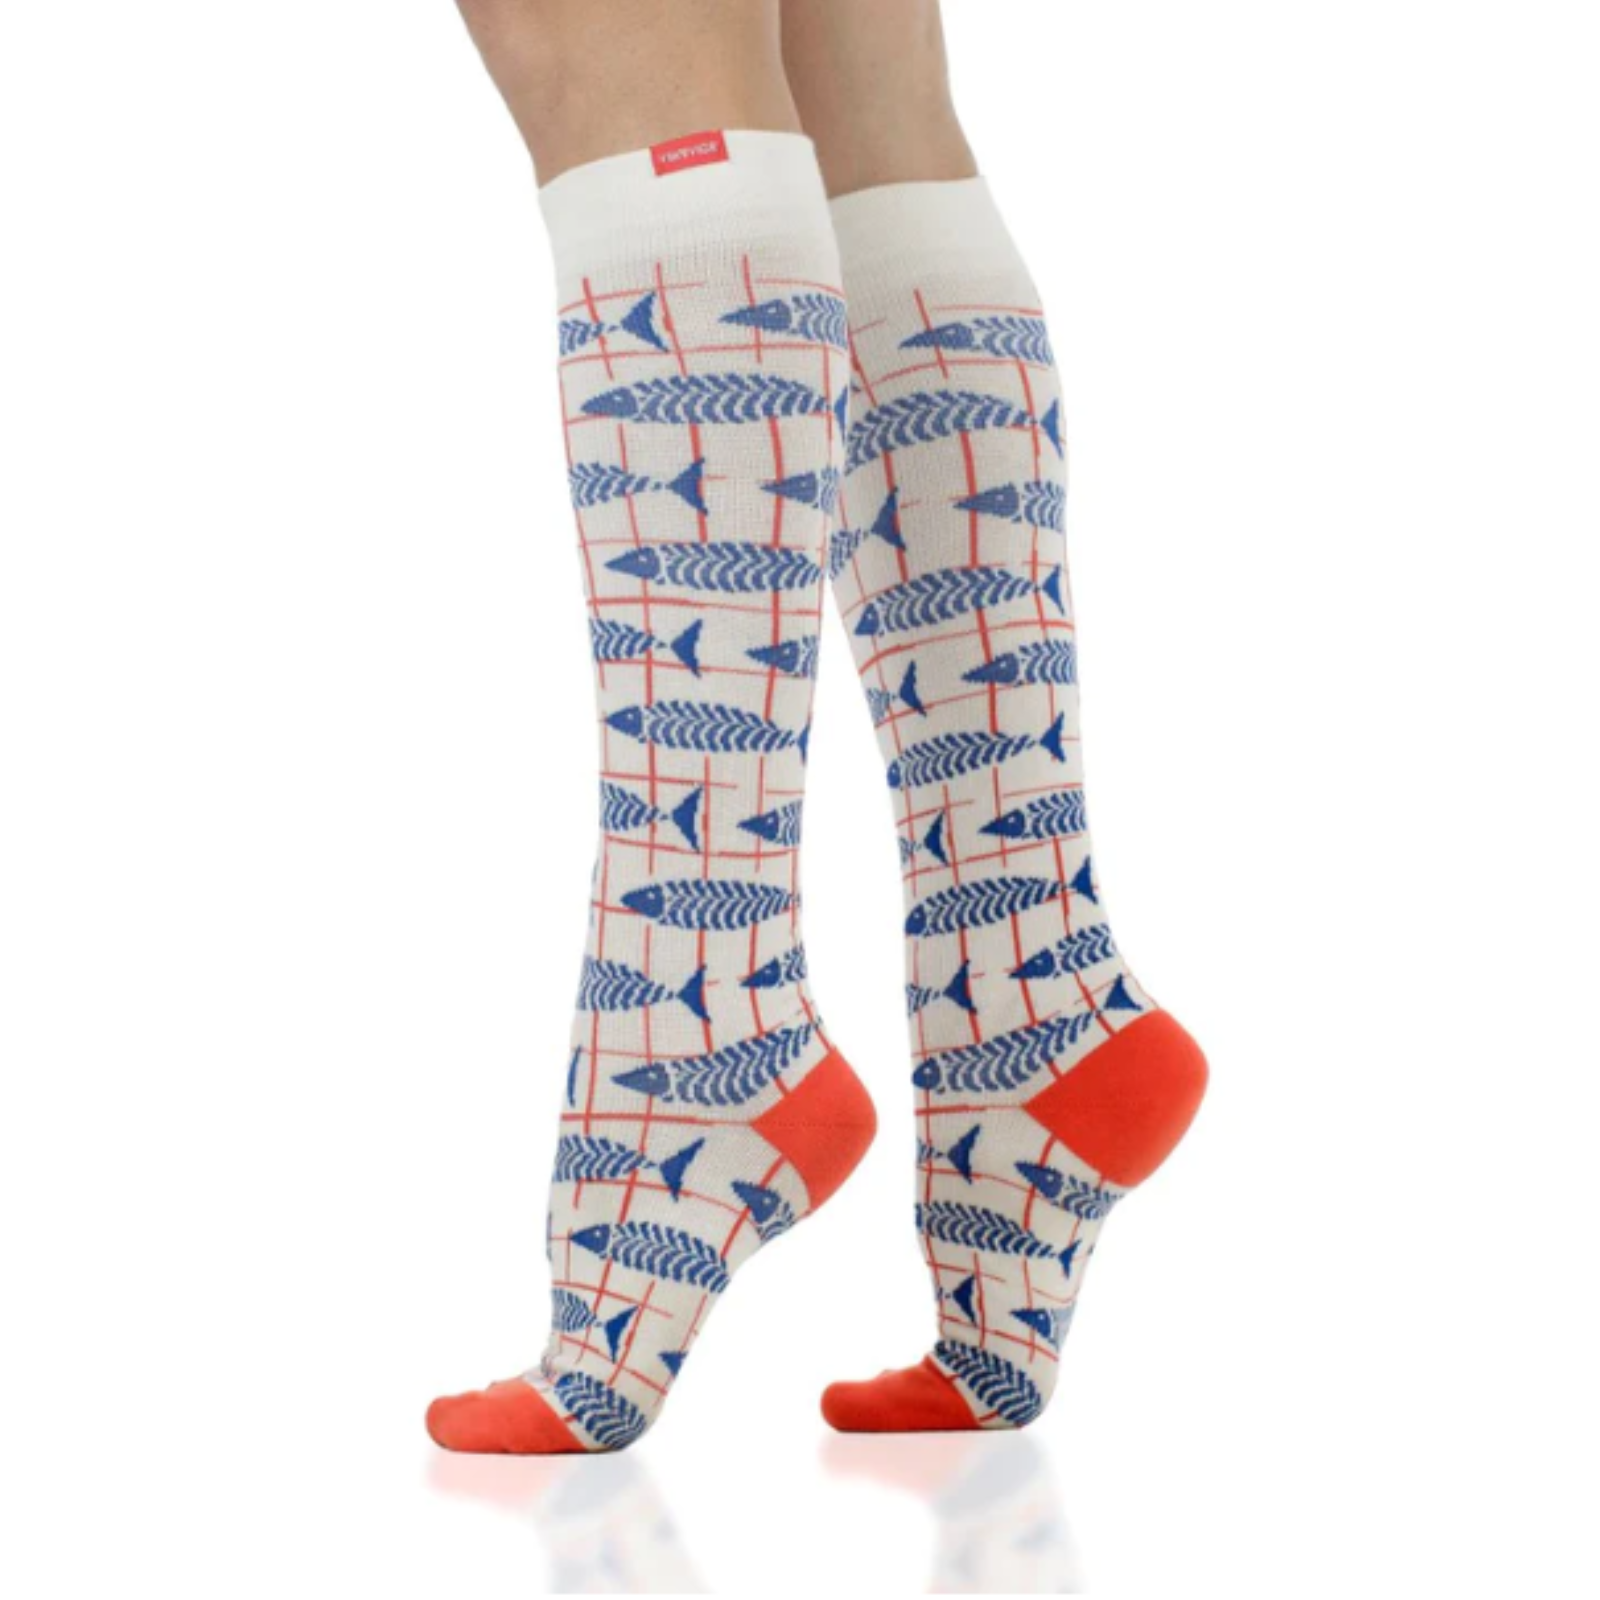 What Are Graduated Compression Stockings & How Do They Work? – VIM & VIGR